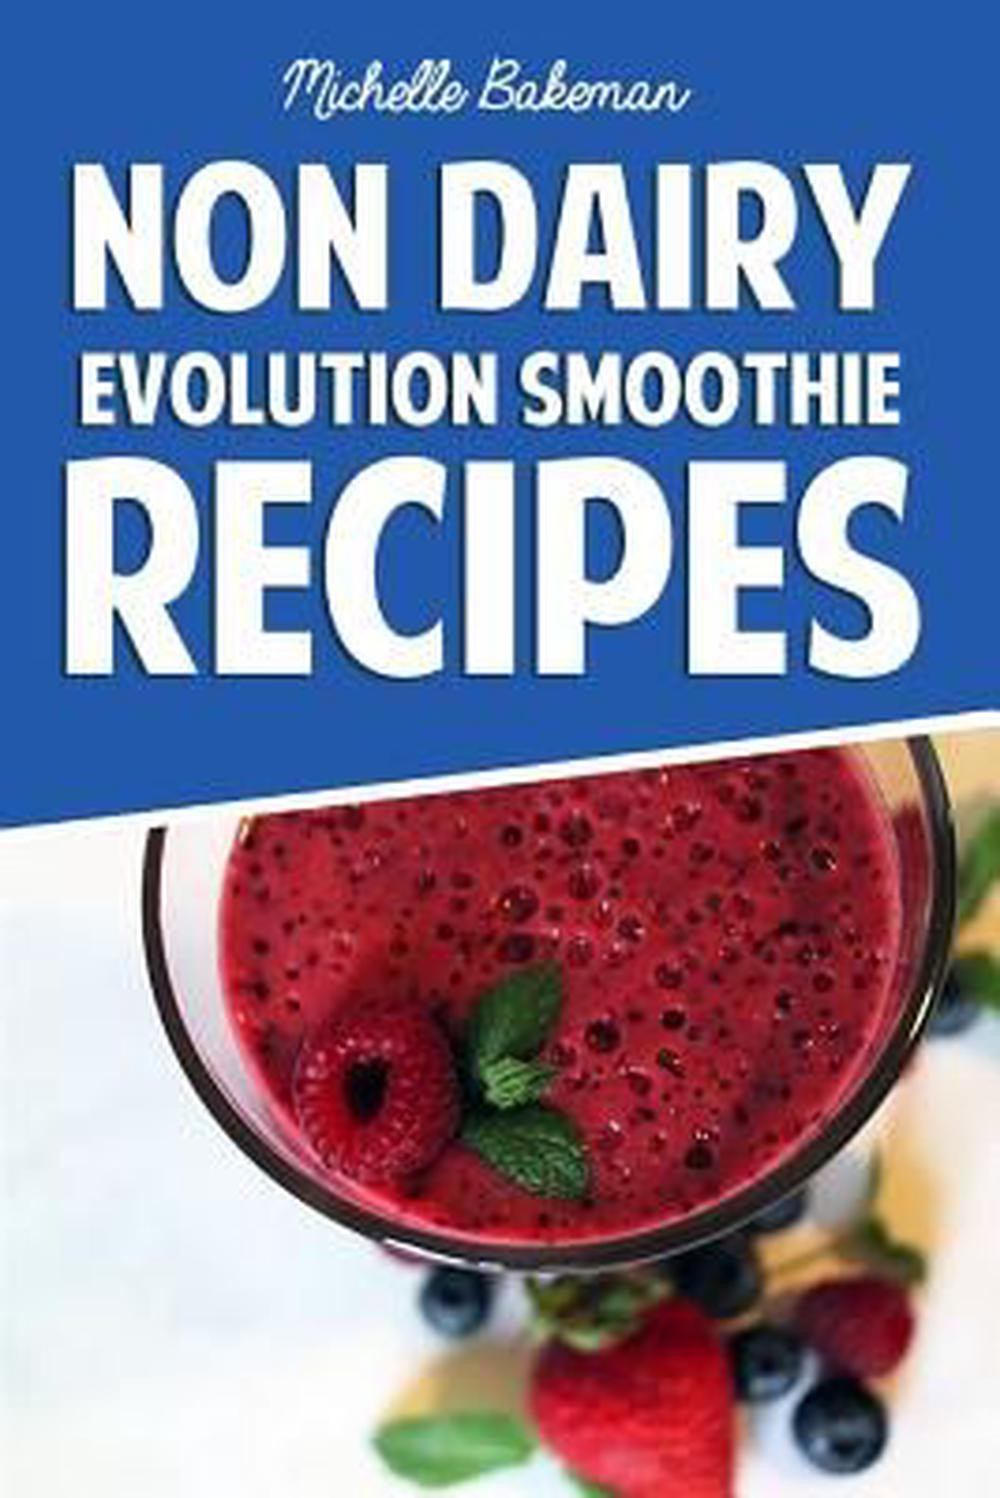 Non Dairy Smoothies For Weight Loss
 Non Dairy Evolution Smoothie Recipes Healthy & Delicious